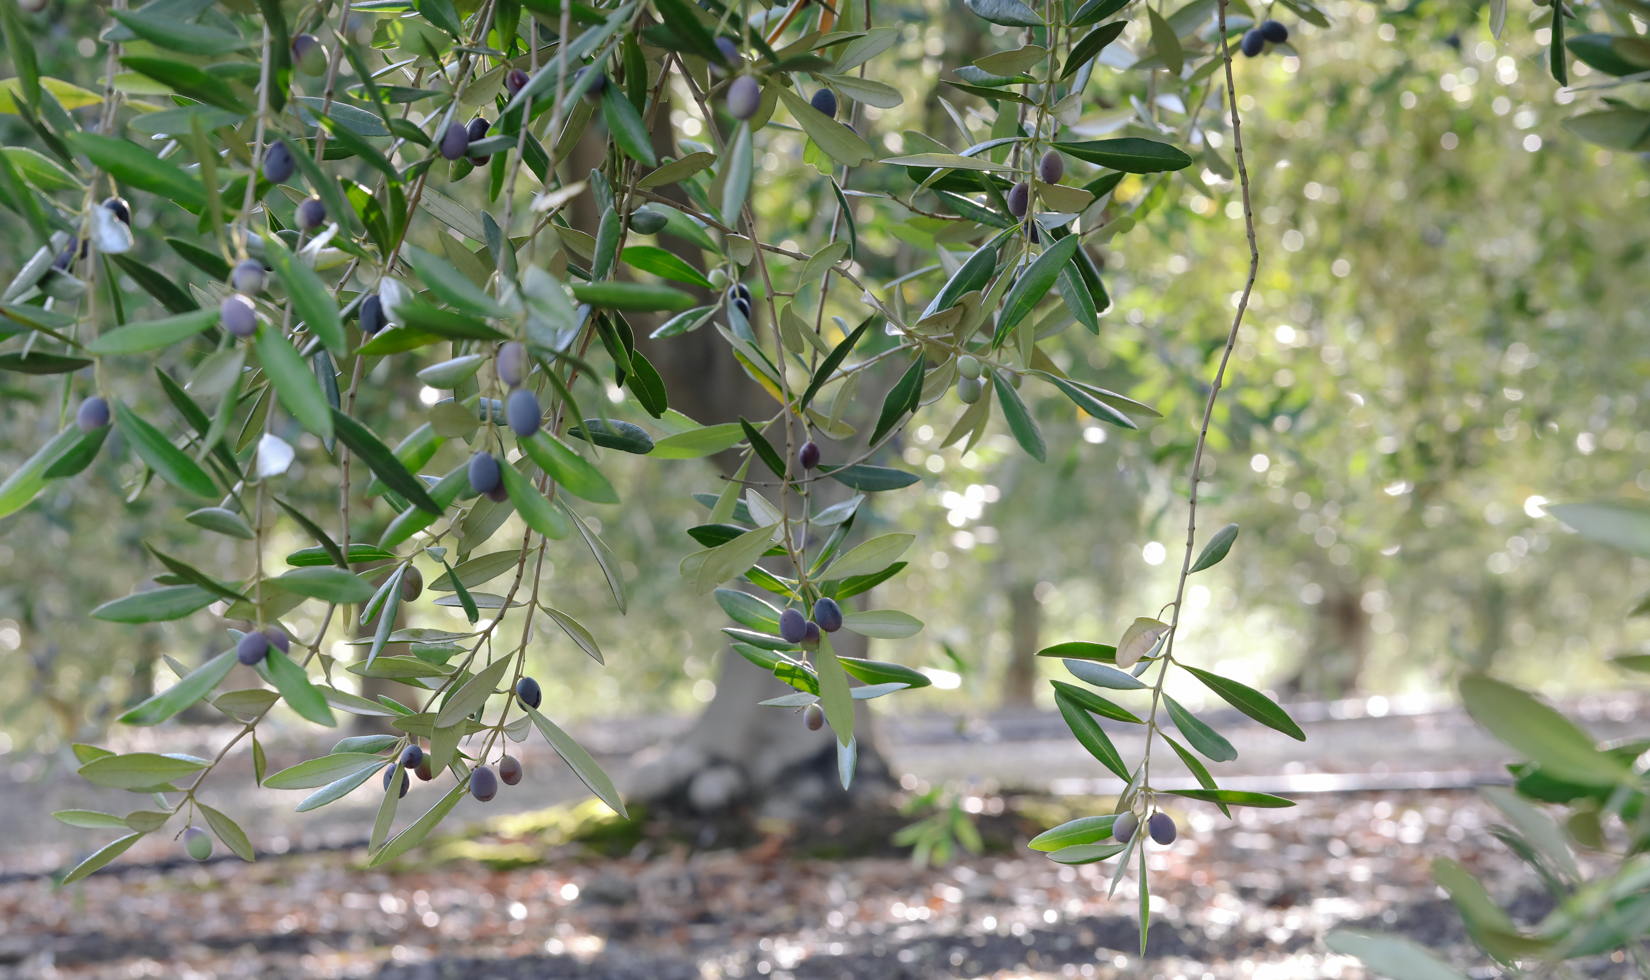 Sonoma olive tree at Jordan Winery, 25 years old